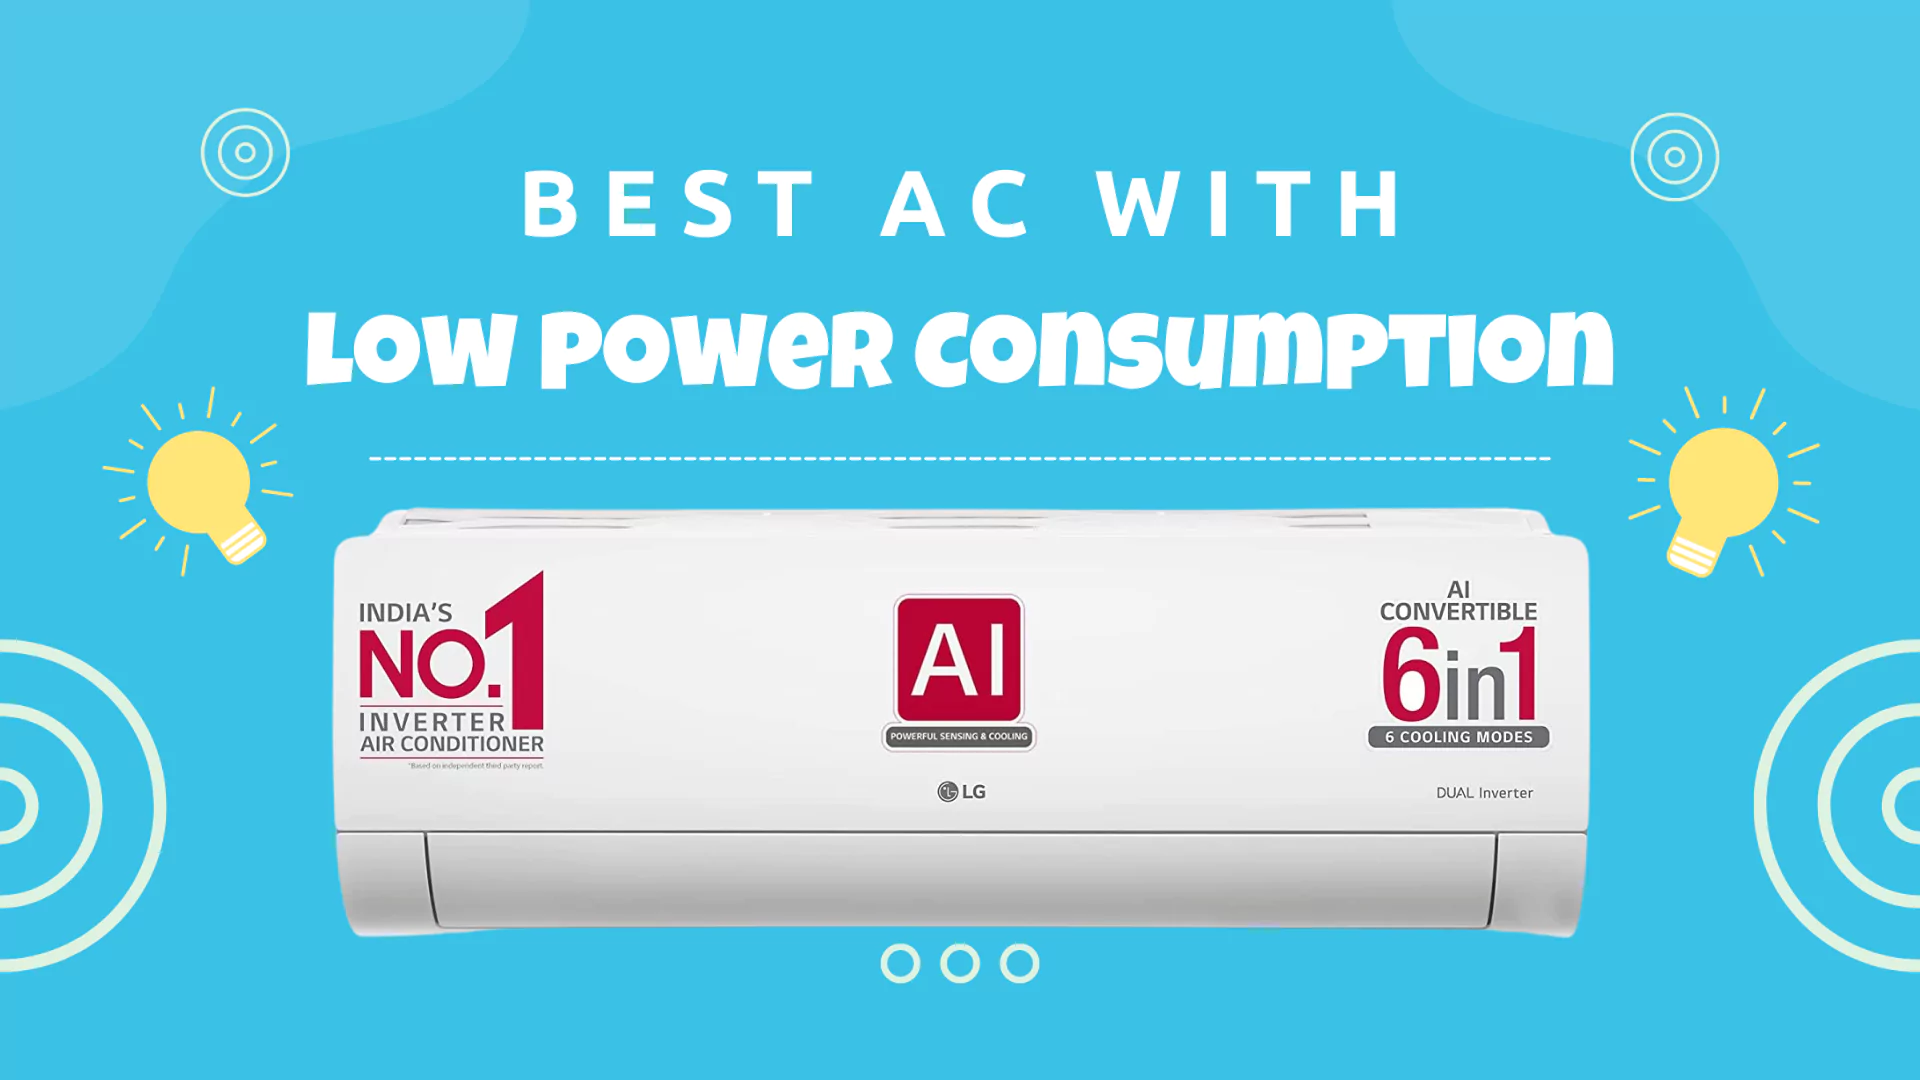 Best AC With Low Power Consumption